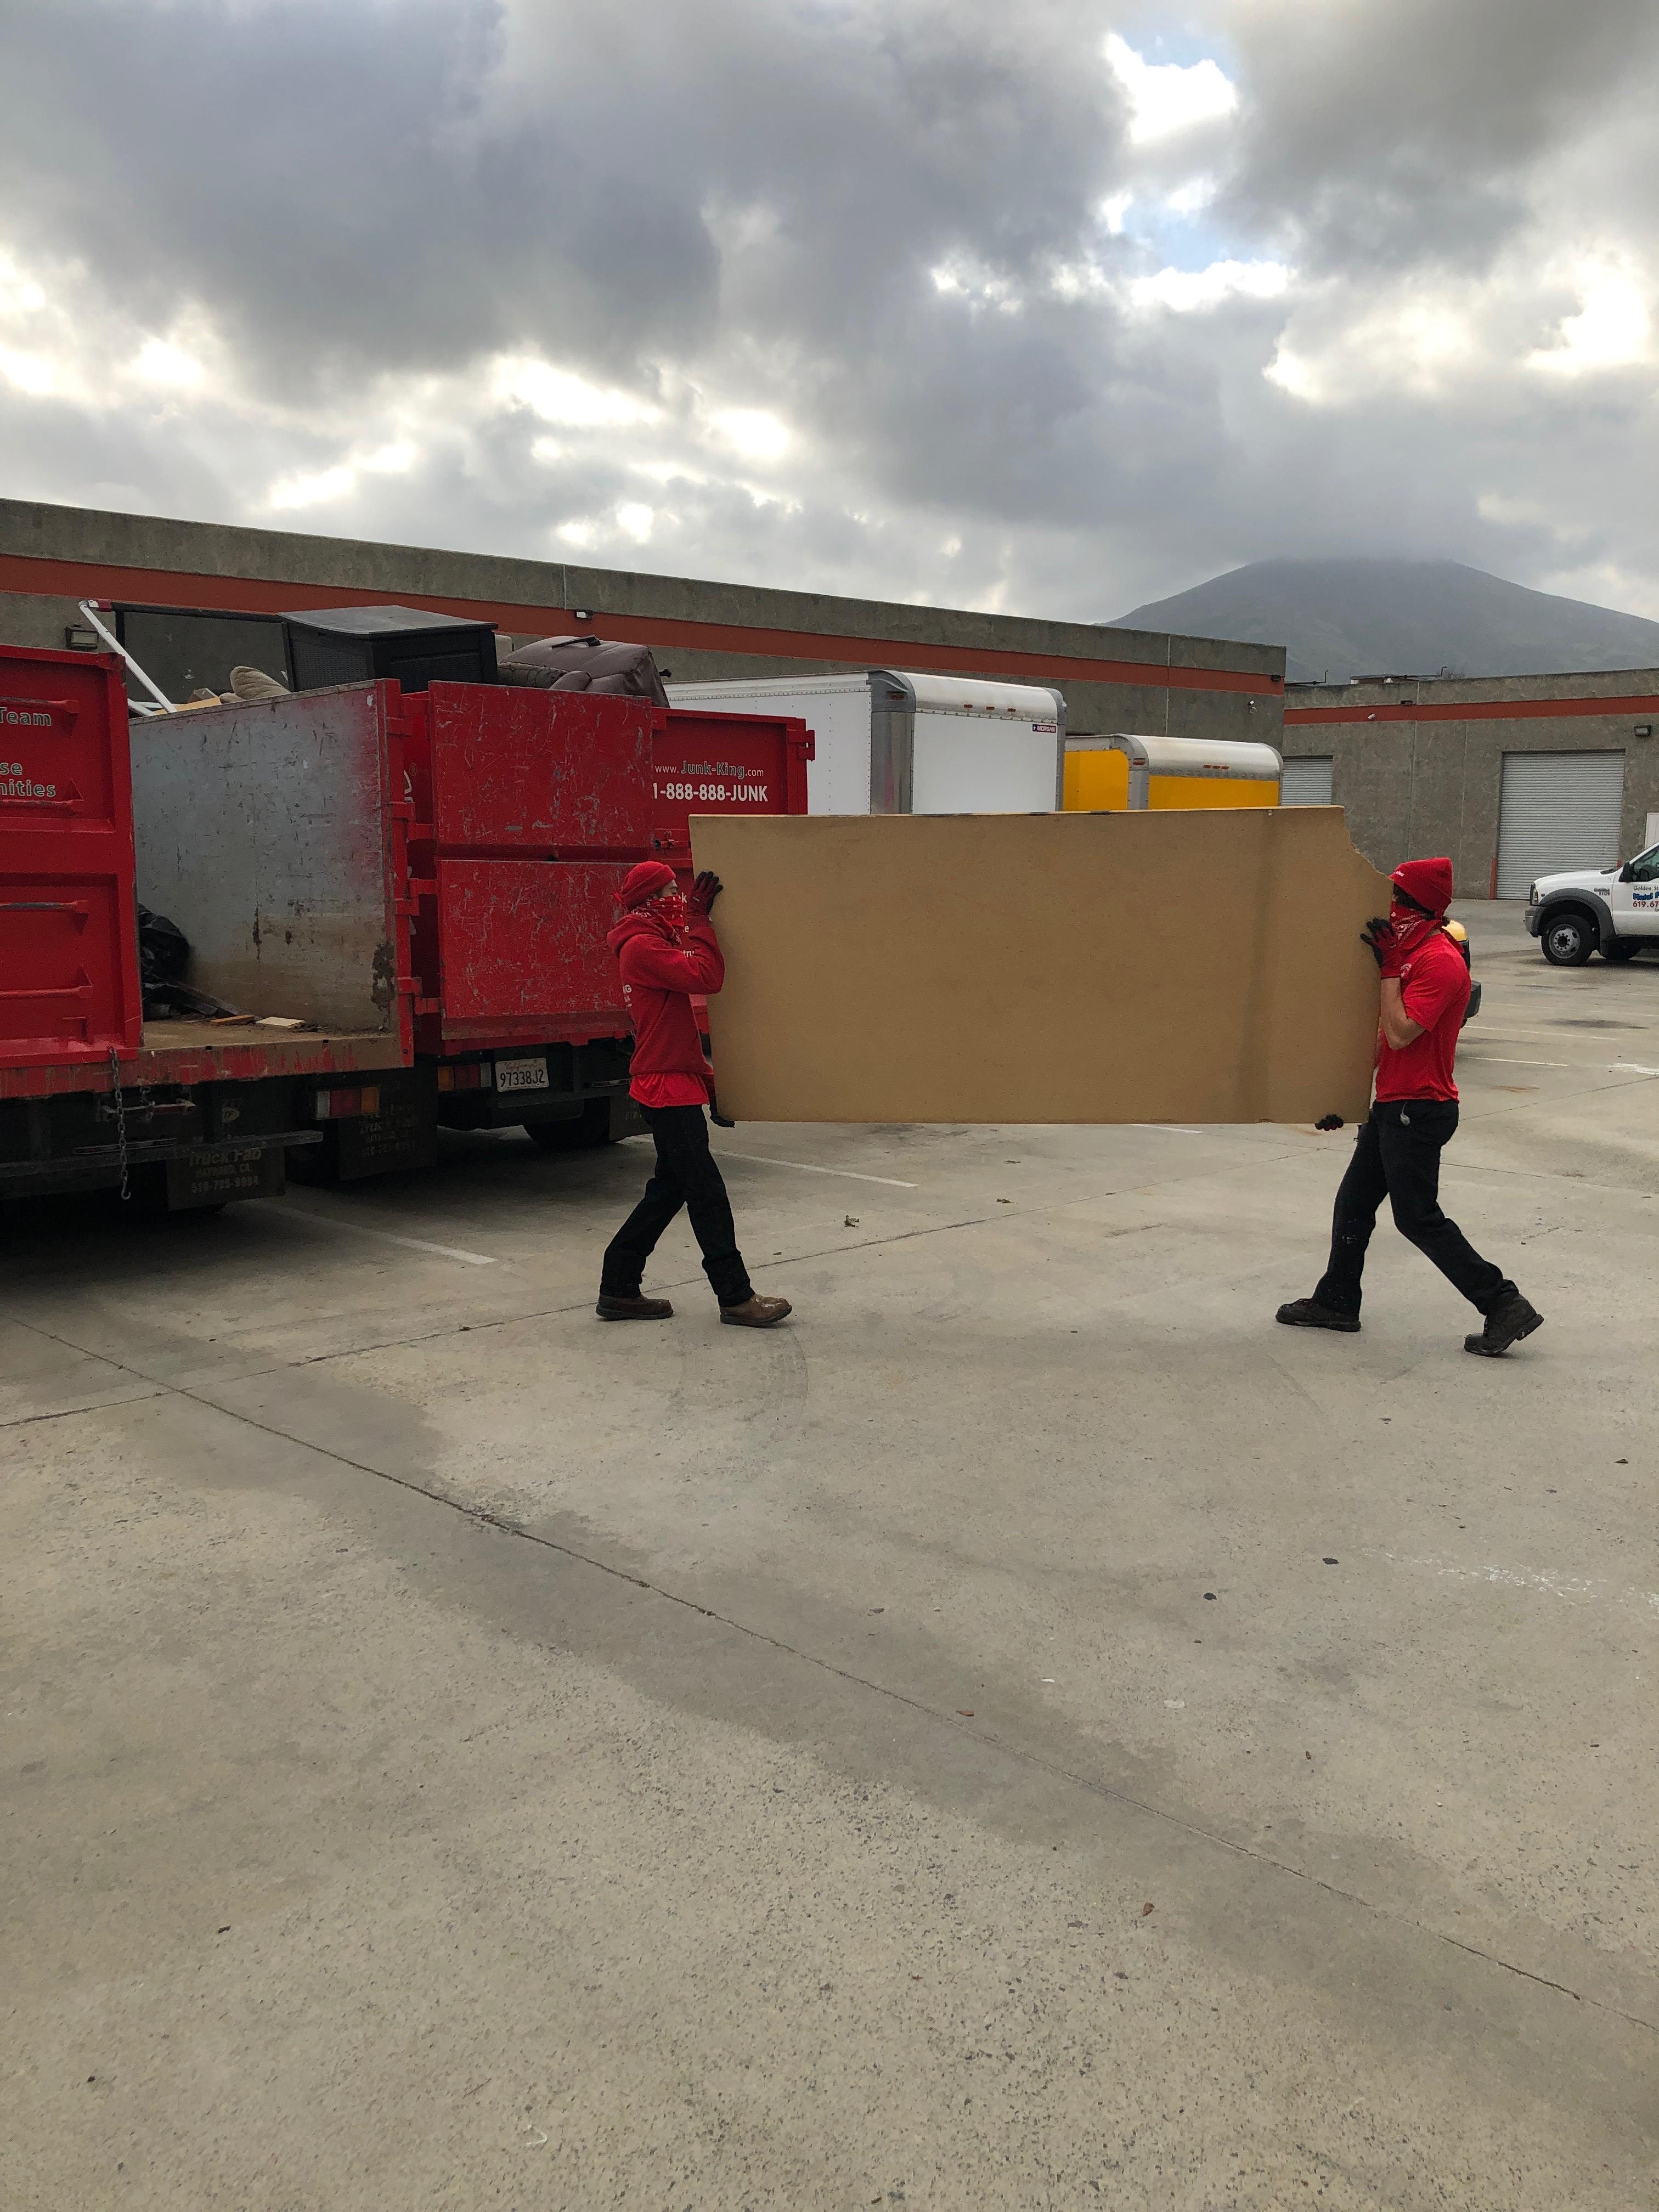 Junk King is all about team work to complete your junk pick up. Our teams work in groups of two on every job to ensure a safe and efficient junk removal job.